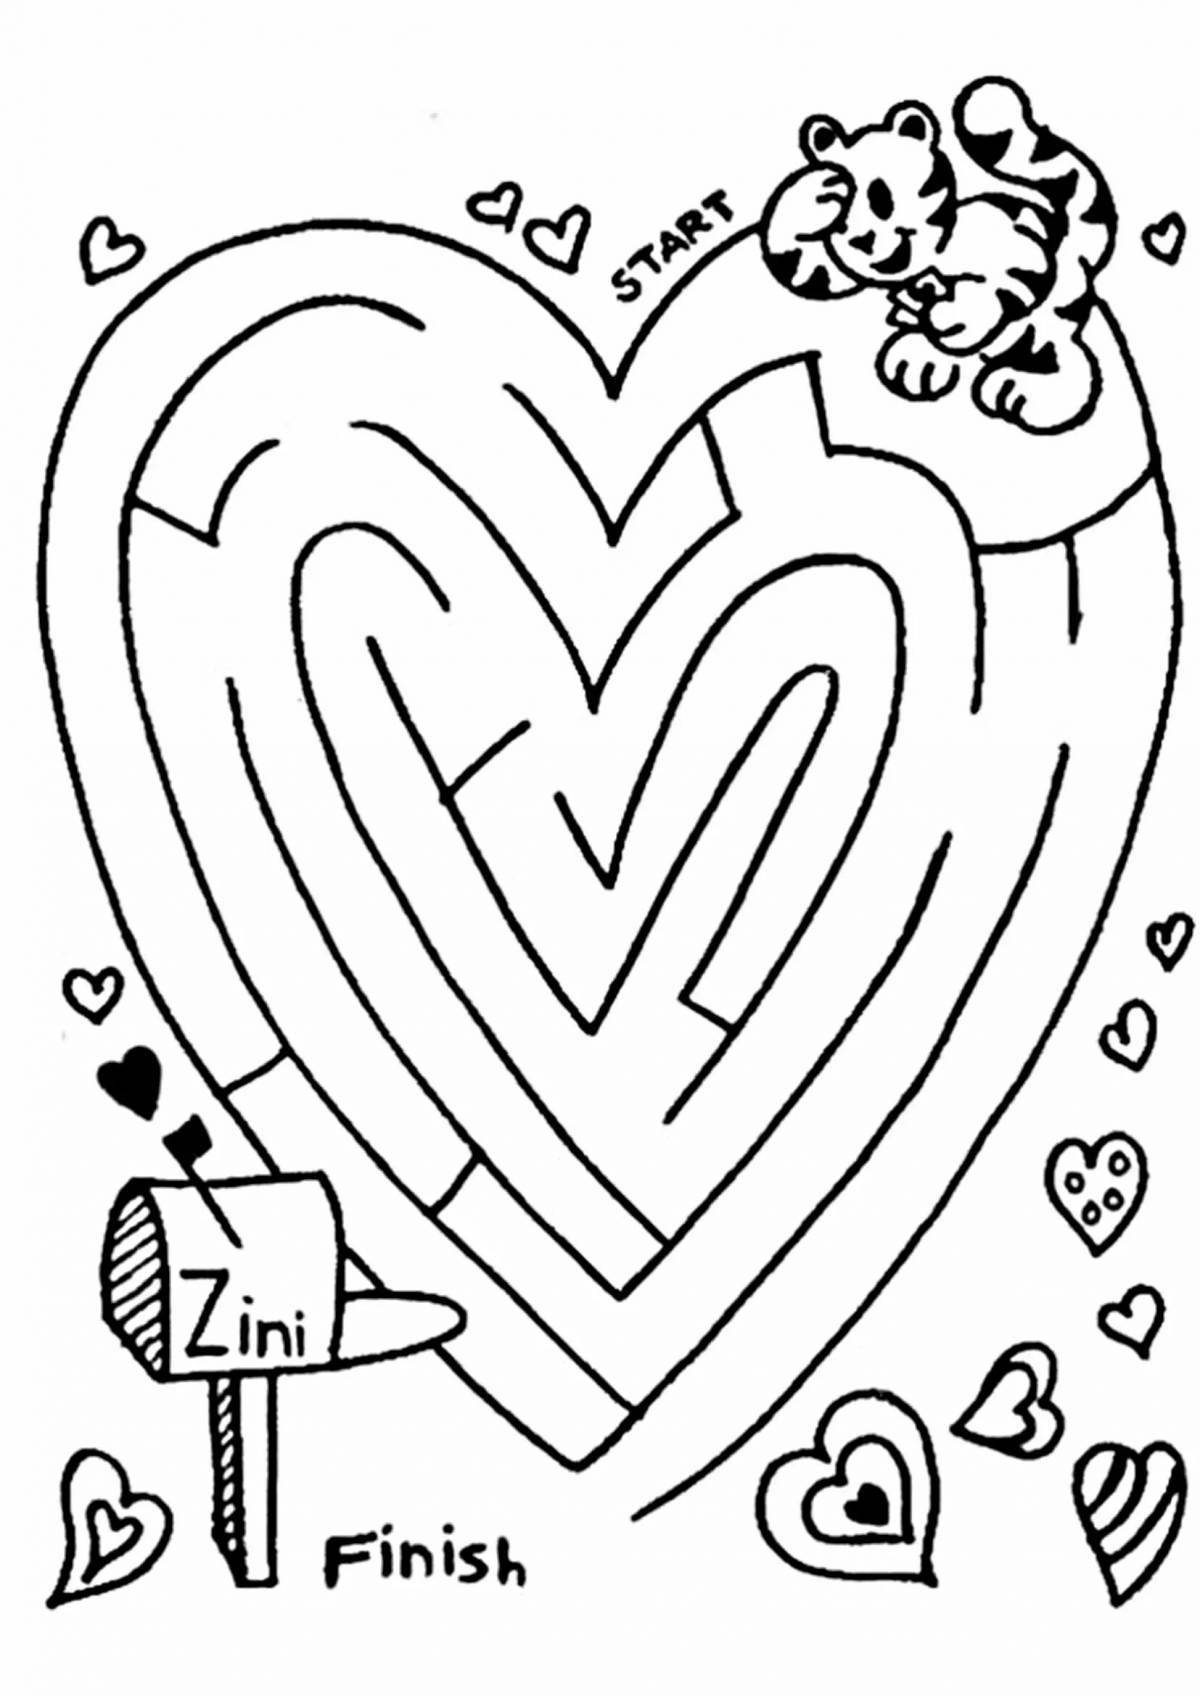 Colorific labyrinth coloring book for 7 year olds